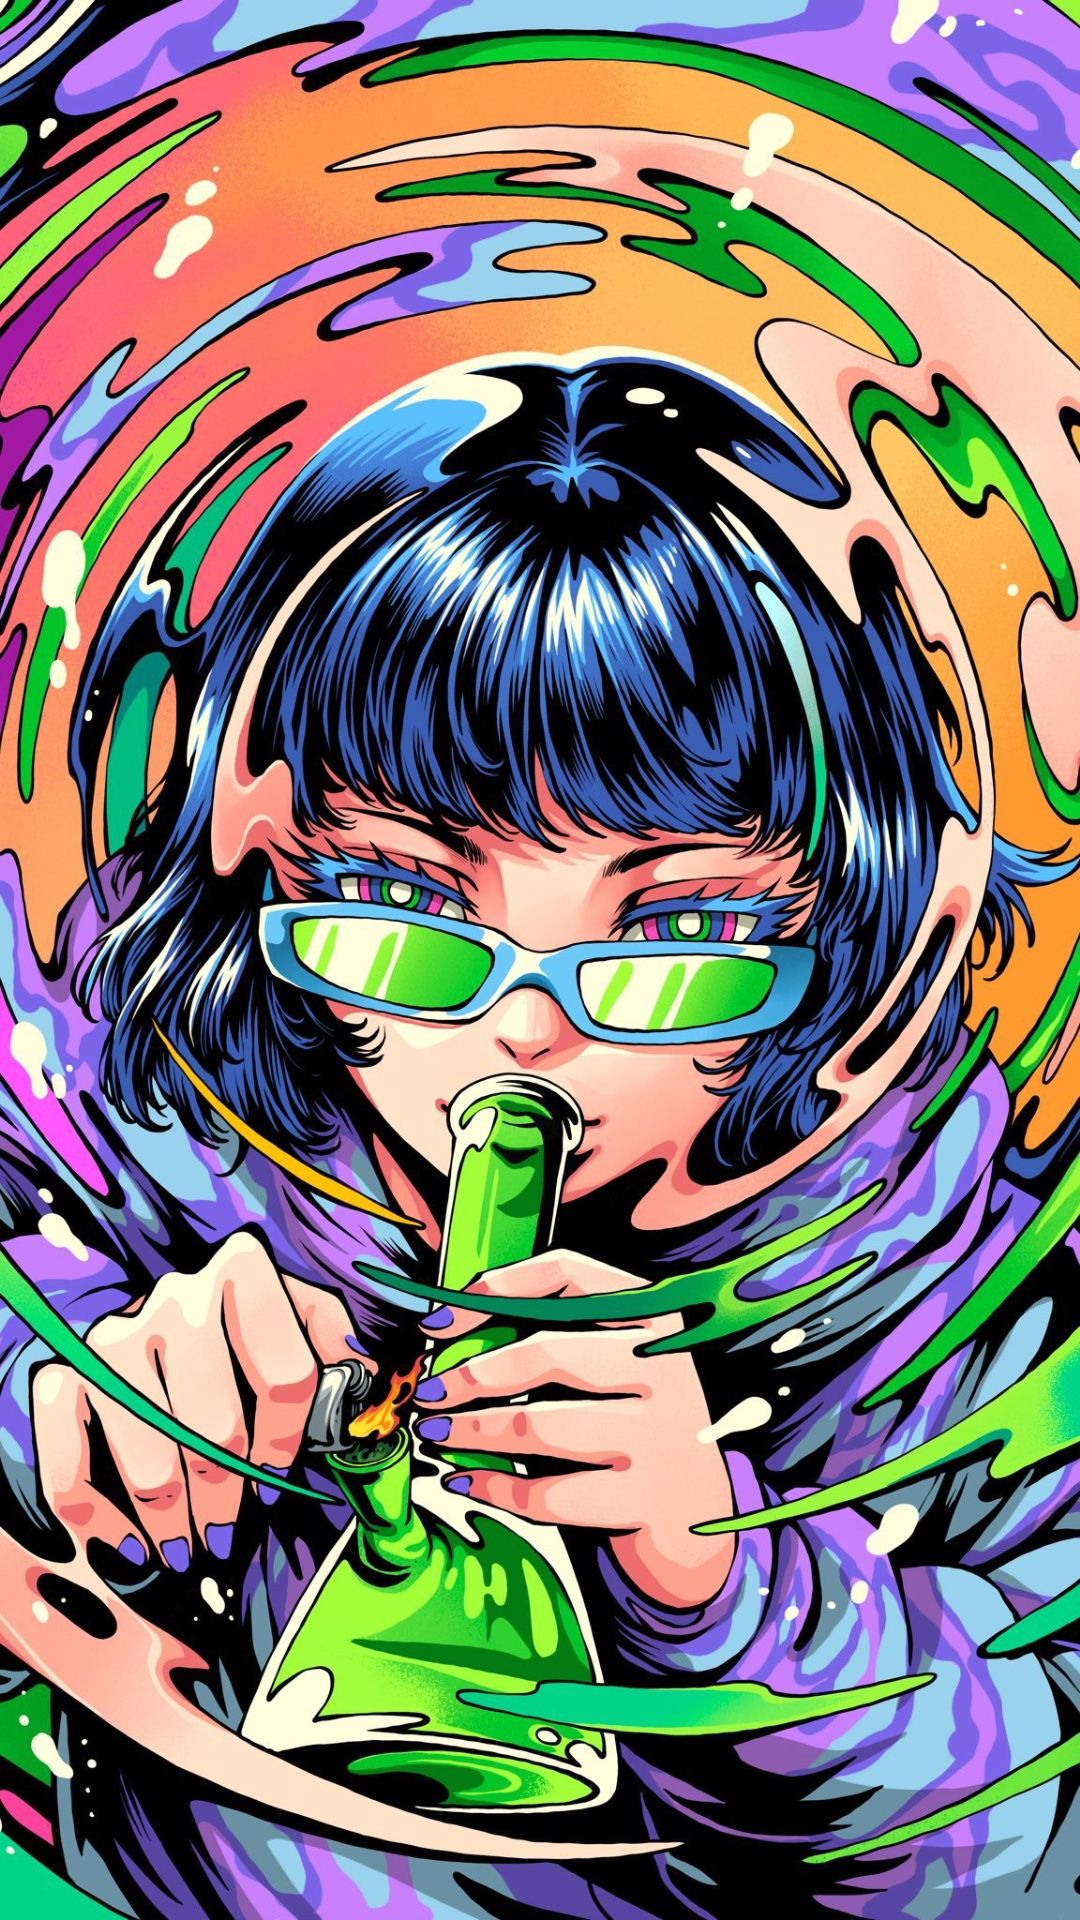 1080x1920 iPhone 8 wallpaper of a girl smoking a bong - Psychedelic